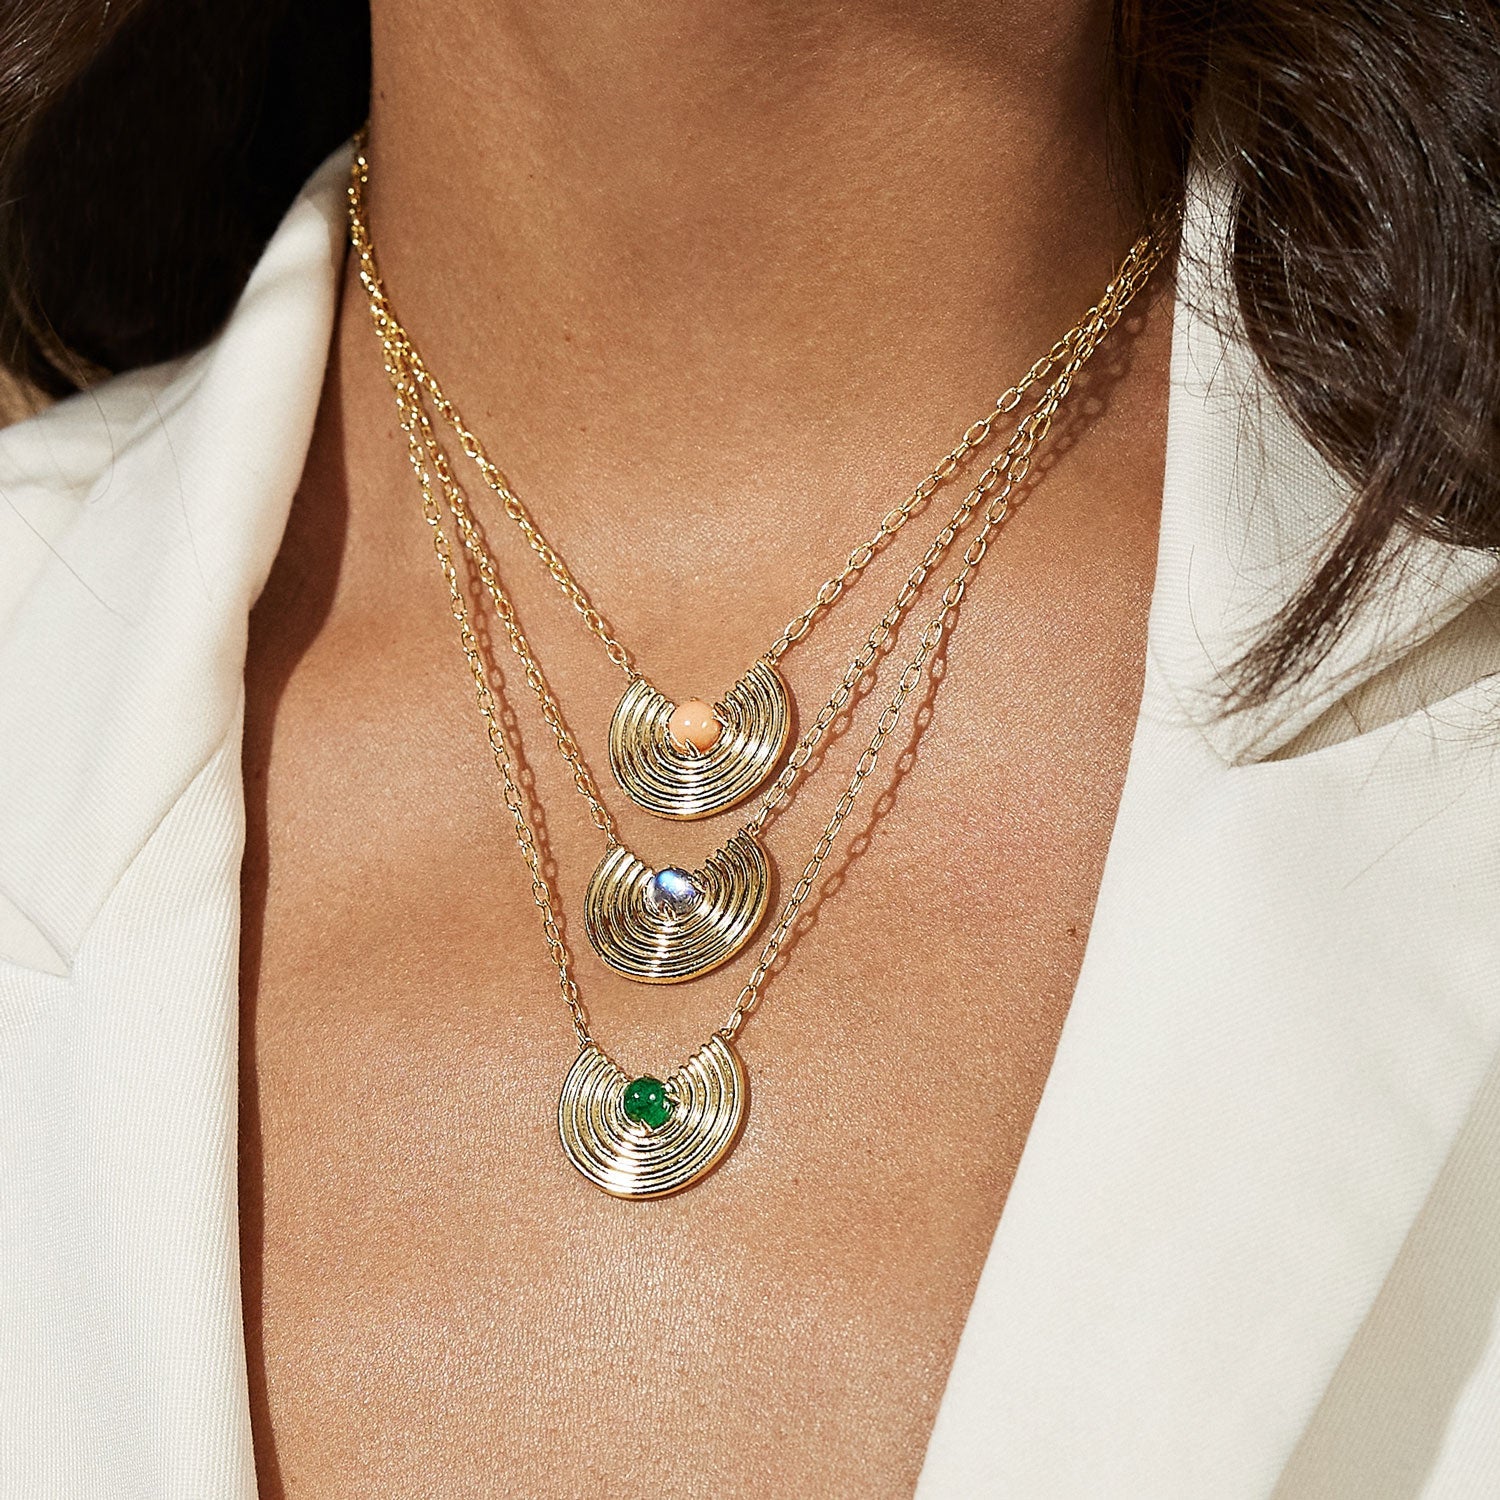 Grand Revival Necklace Emerald - ParkFord